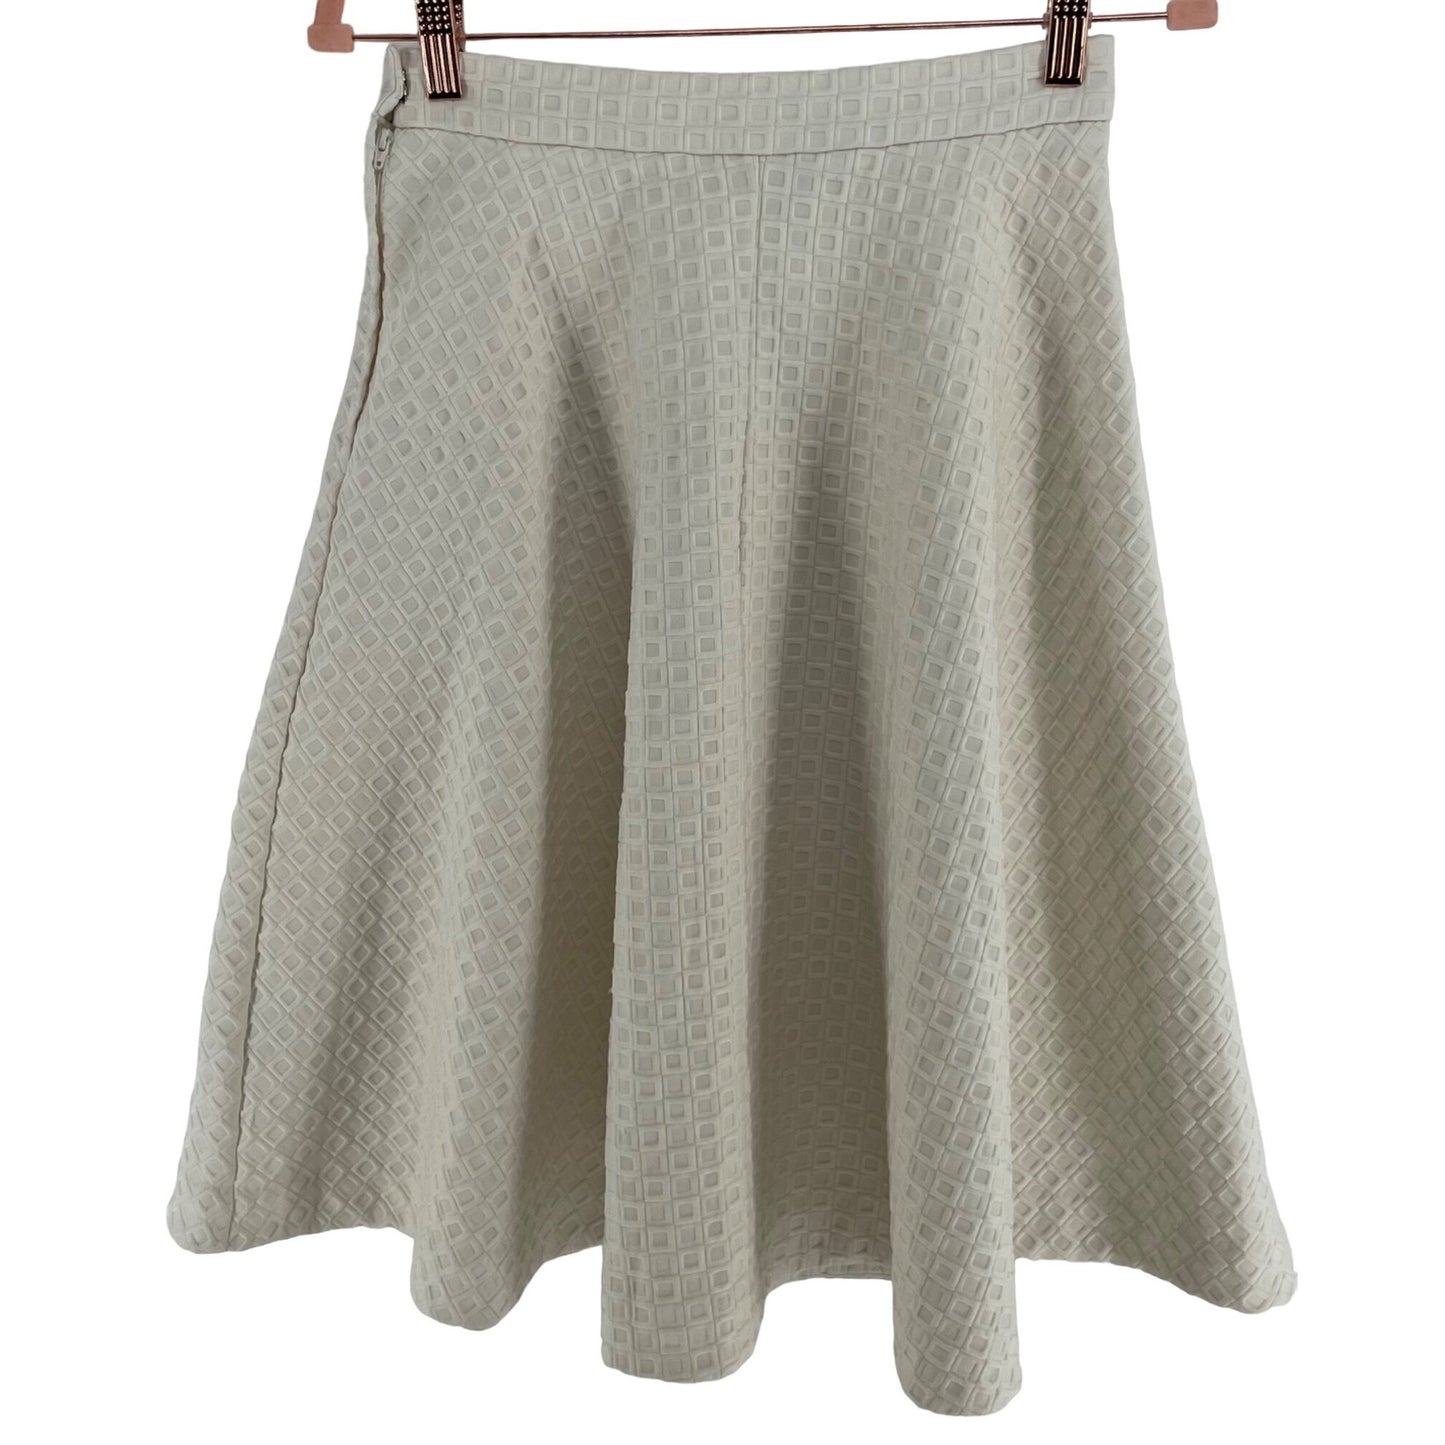 H&M Women's Size 6 Cream/Off-White A-Line Pleated Poodle Skirt